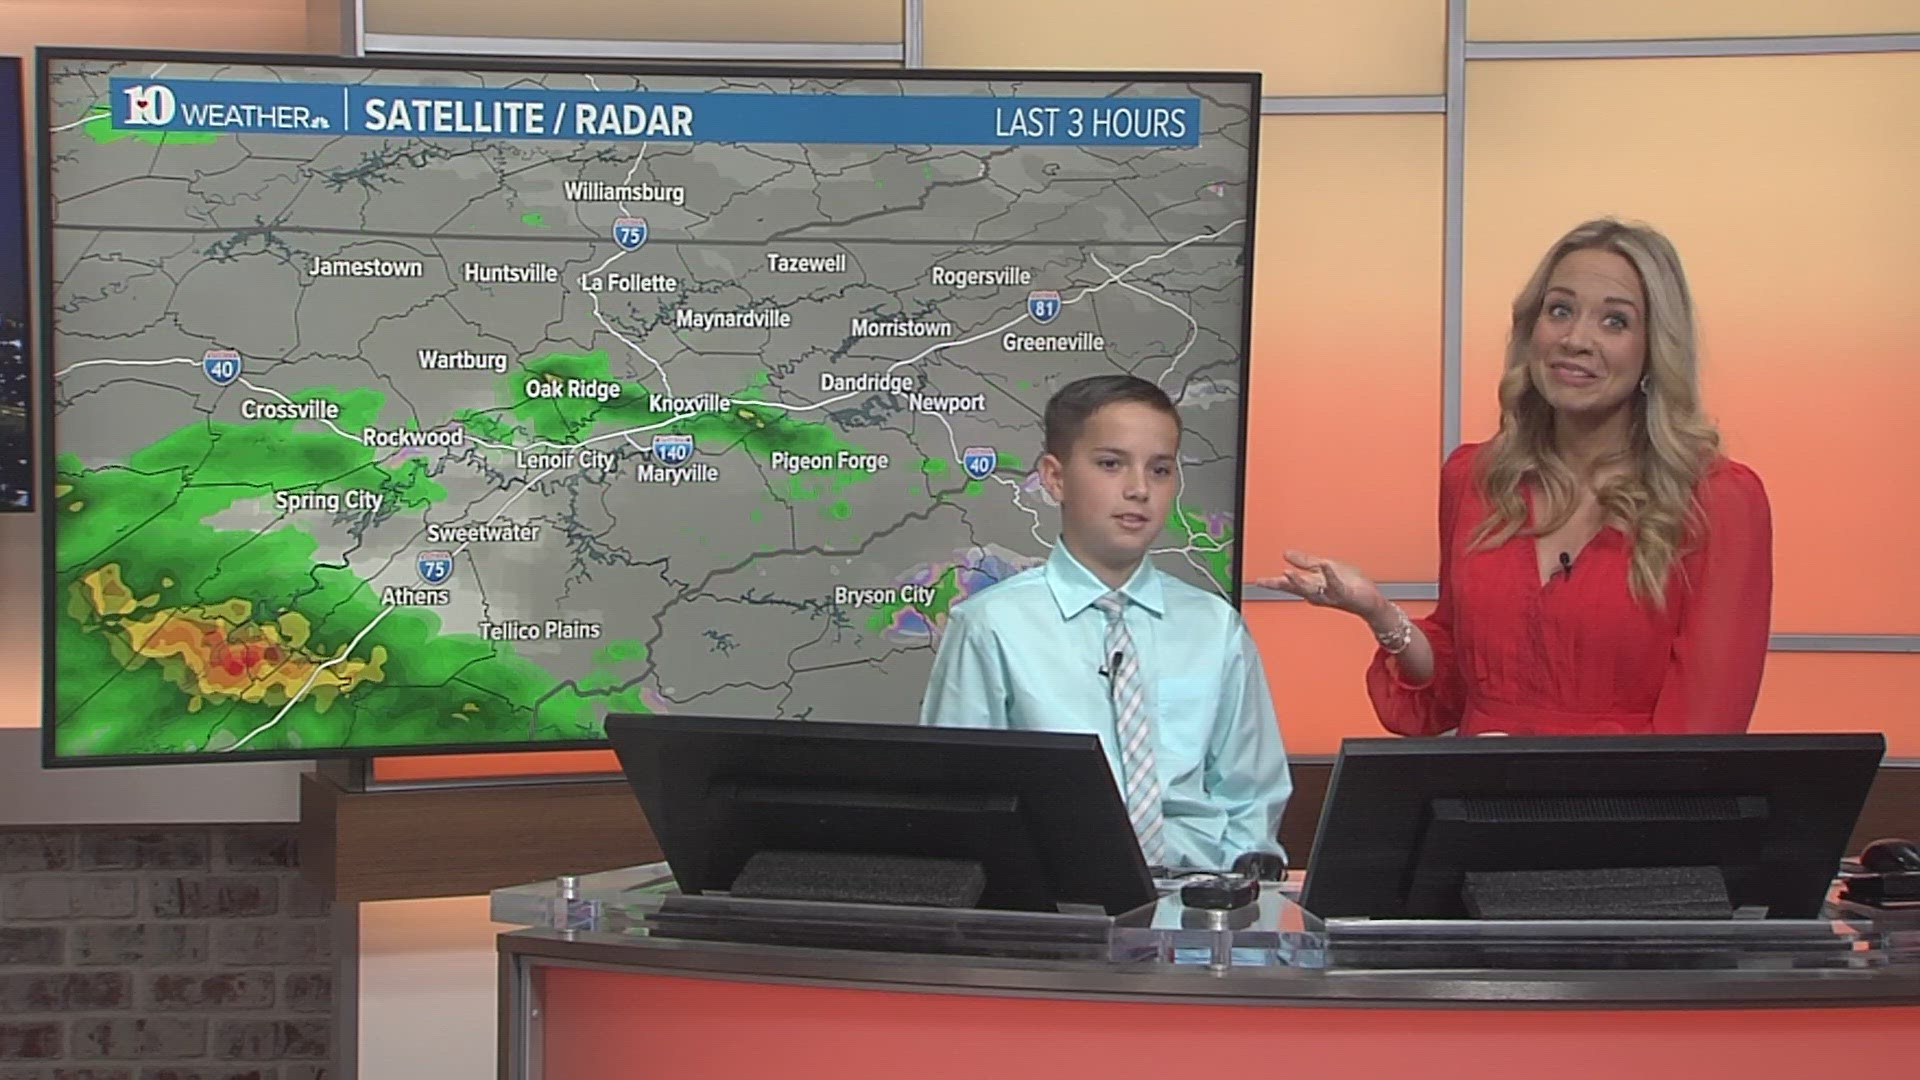 Nolan wants to be a meteorologist when he grows up and wouldn't mind storm chasing one day!